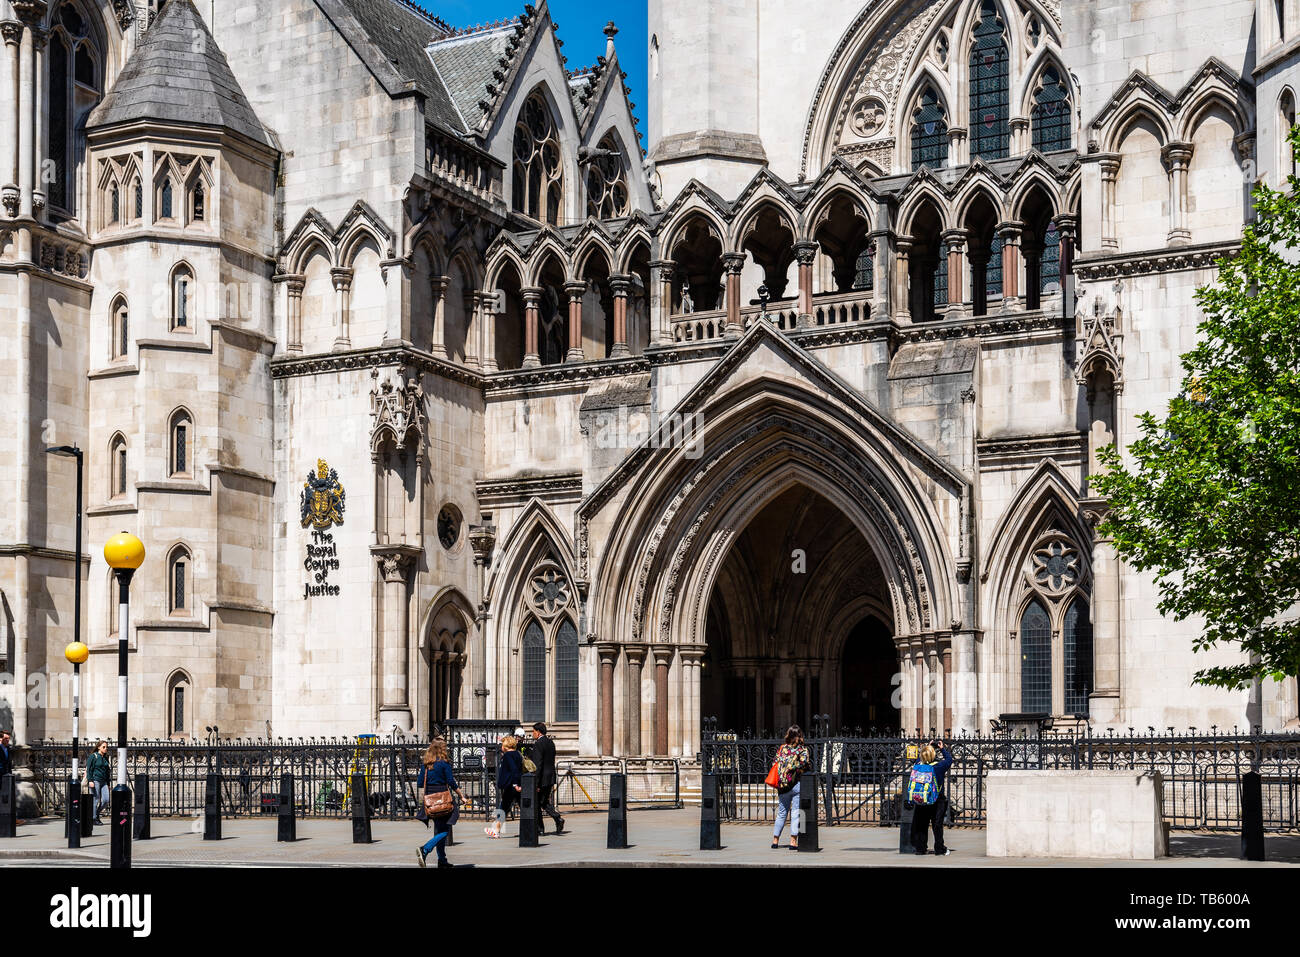 London, UK - May 14, 2019: Royal Courts of Justice located on Strand within the City of Westminster, near the border with the City of London Stock Photo